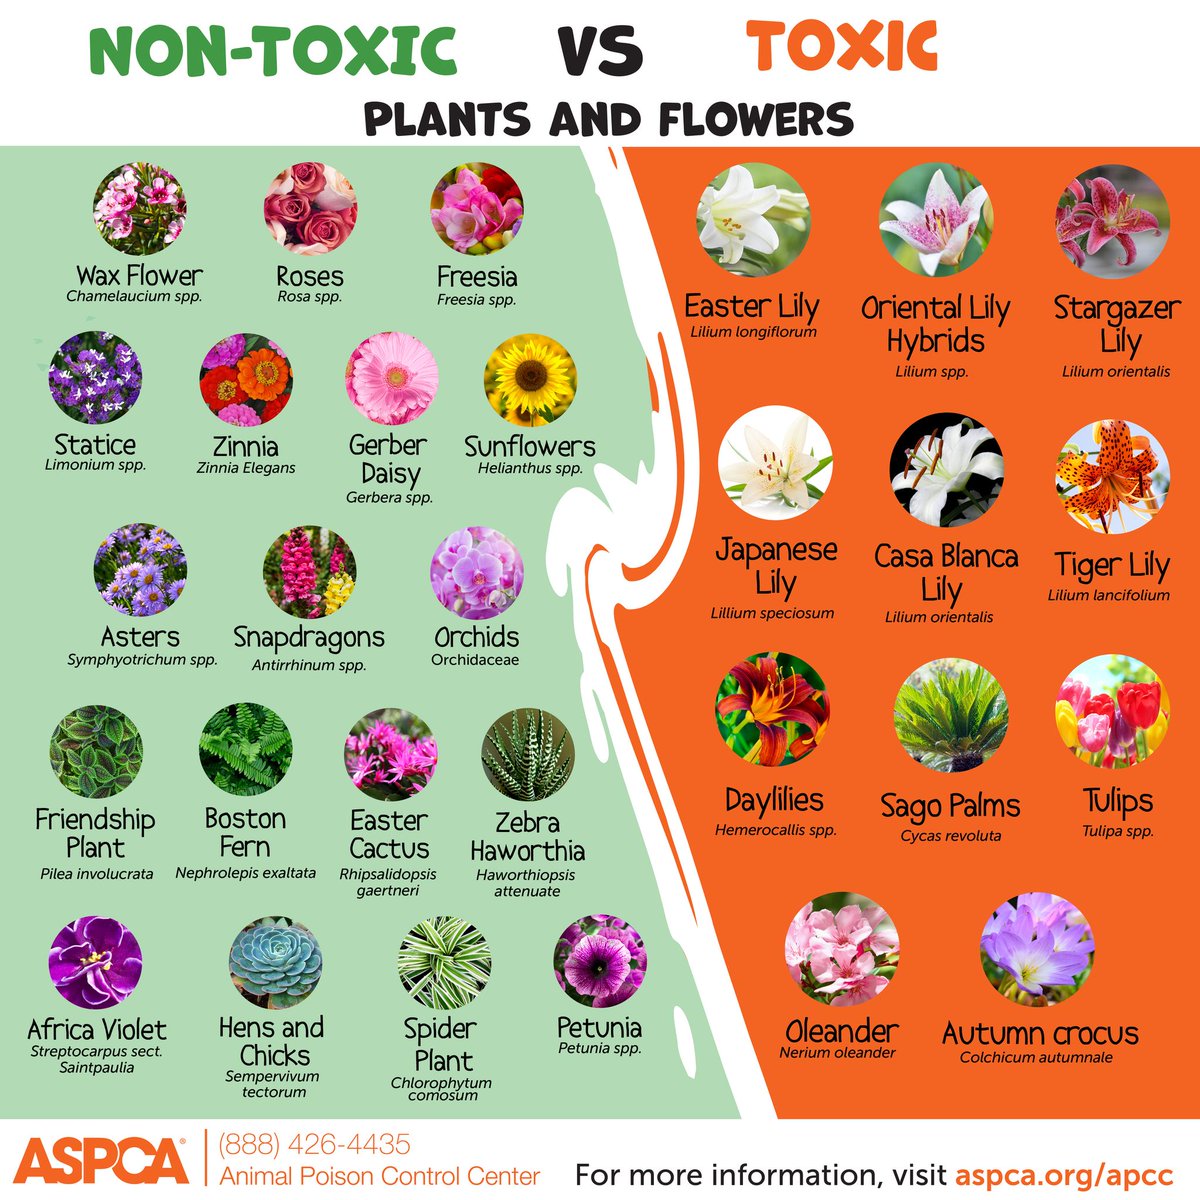 Not all flowers are safe for pets. To spread awareness, share this list from the @ASPCA Animal Poison Control Center to keep the pets in your community safe. 🌸 #PetSafety . For more resources from the ASPCA Animal Poison Control Center, go here. 👇 aspcapro.org/topics/aspca-a…